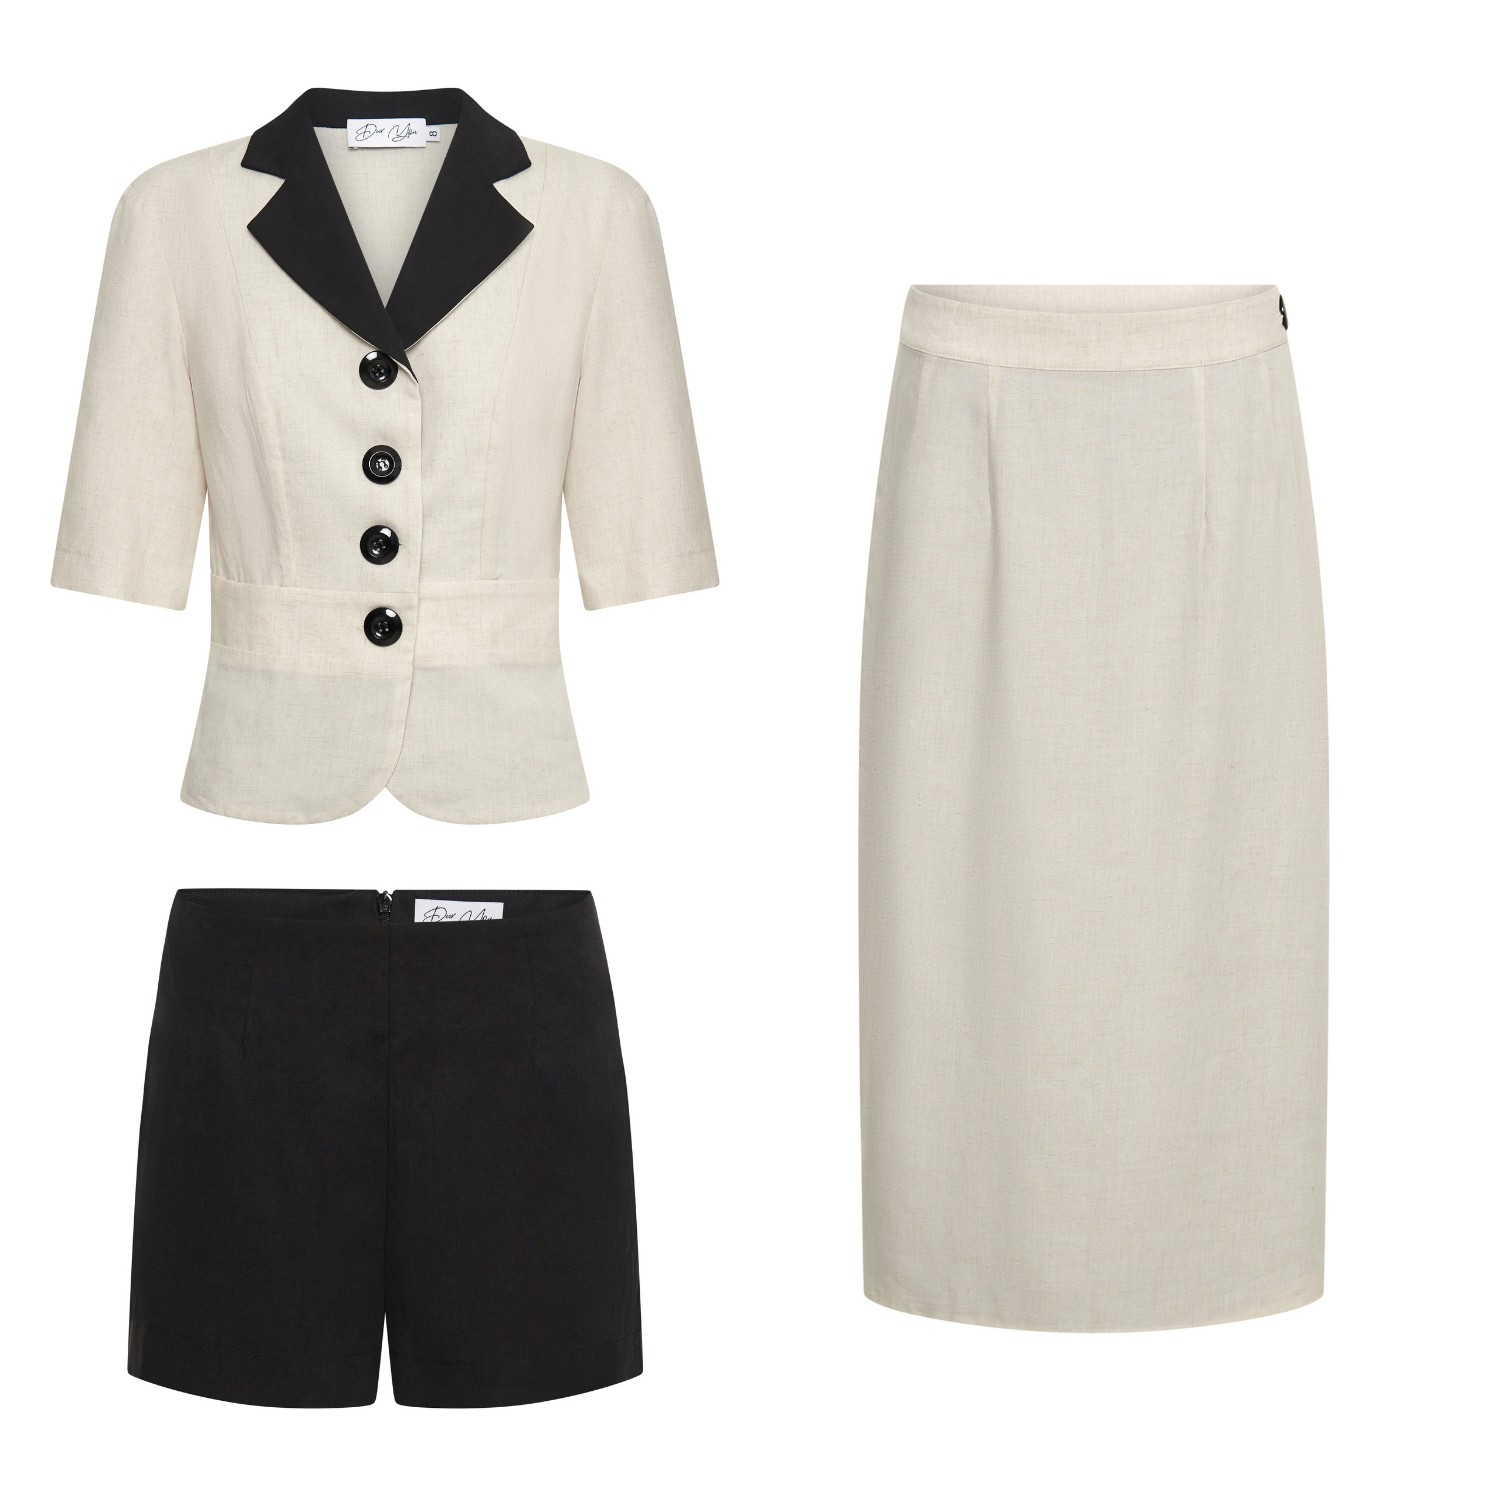 Deer You Neutrals / Black Iris Igniting Three Piece Set Consisting Of Jacket, Shorts & Skirt In Natural In White